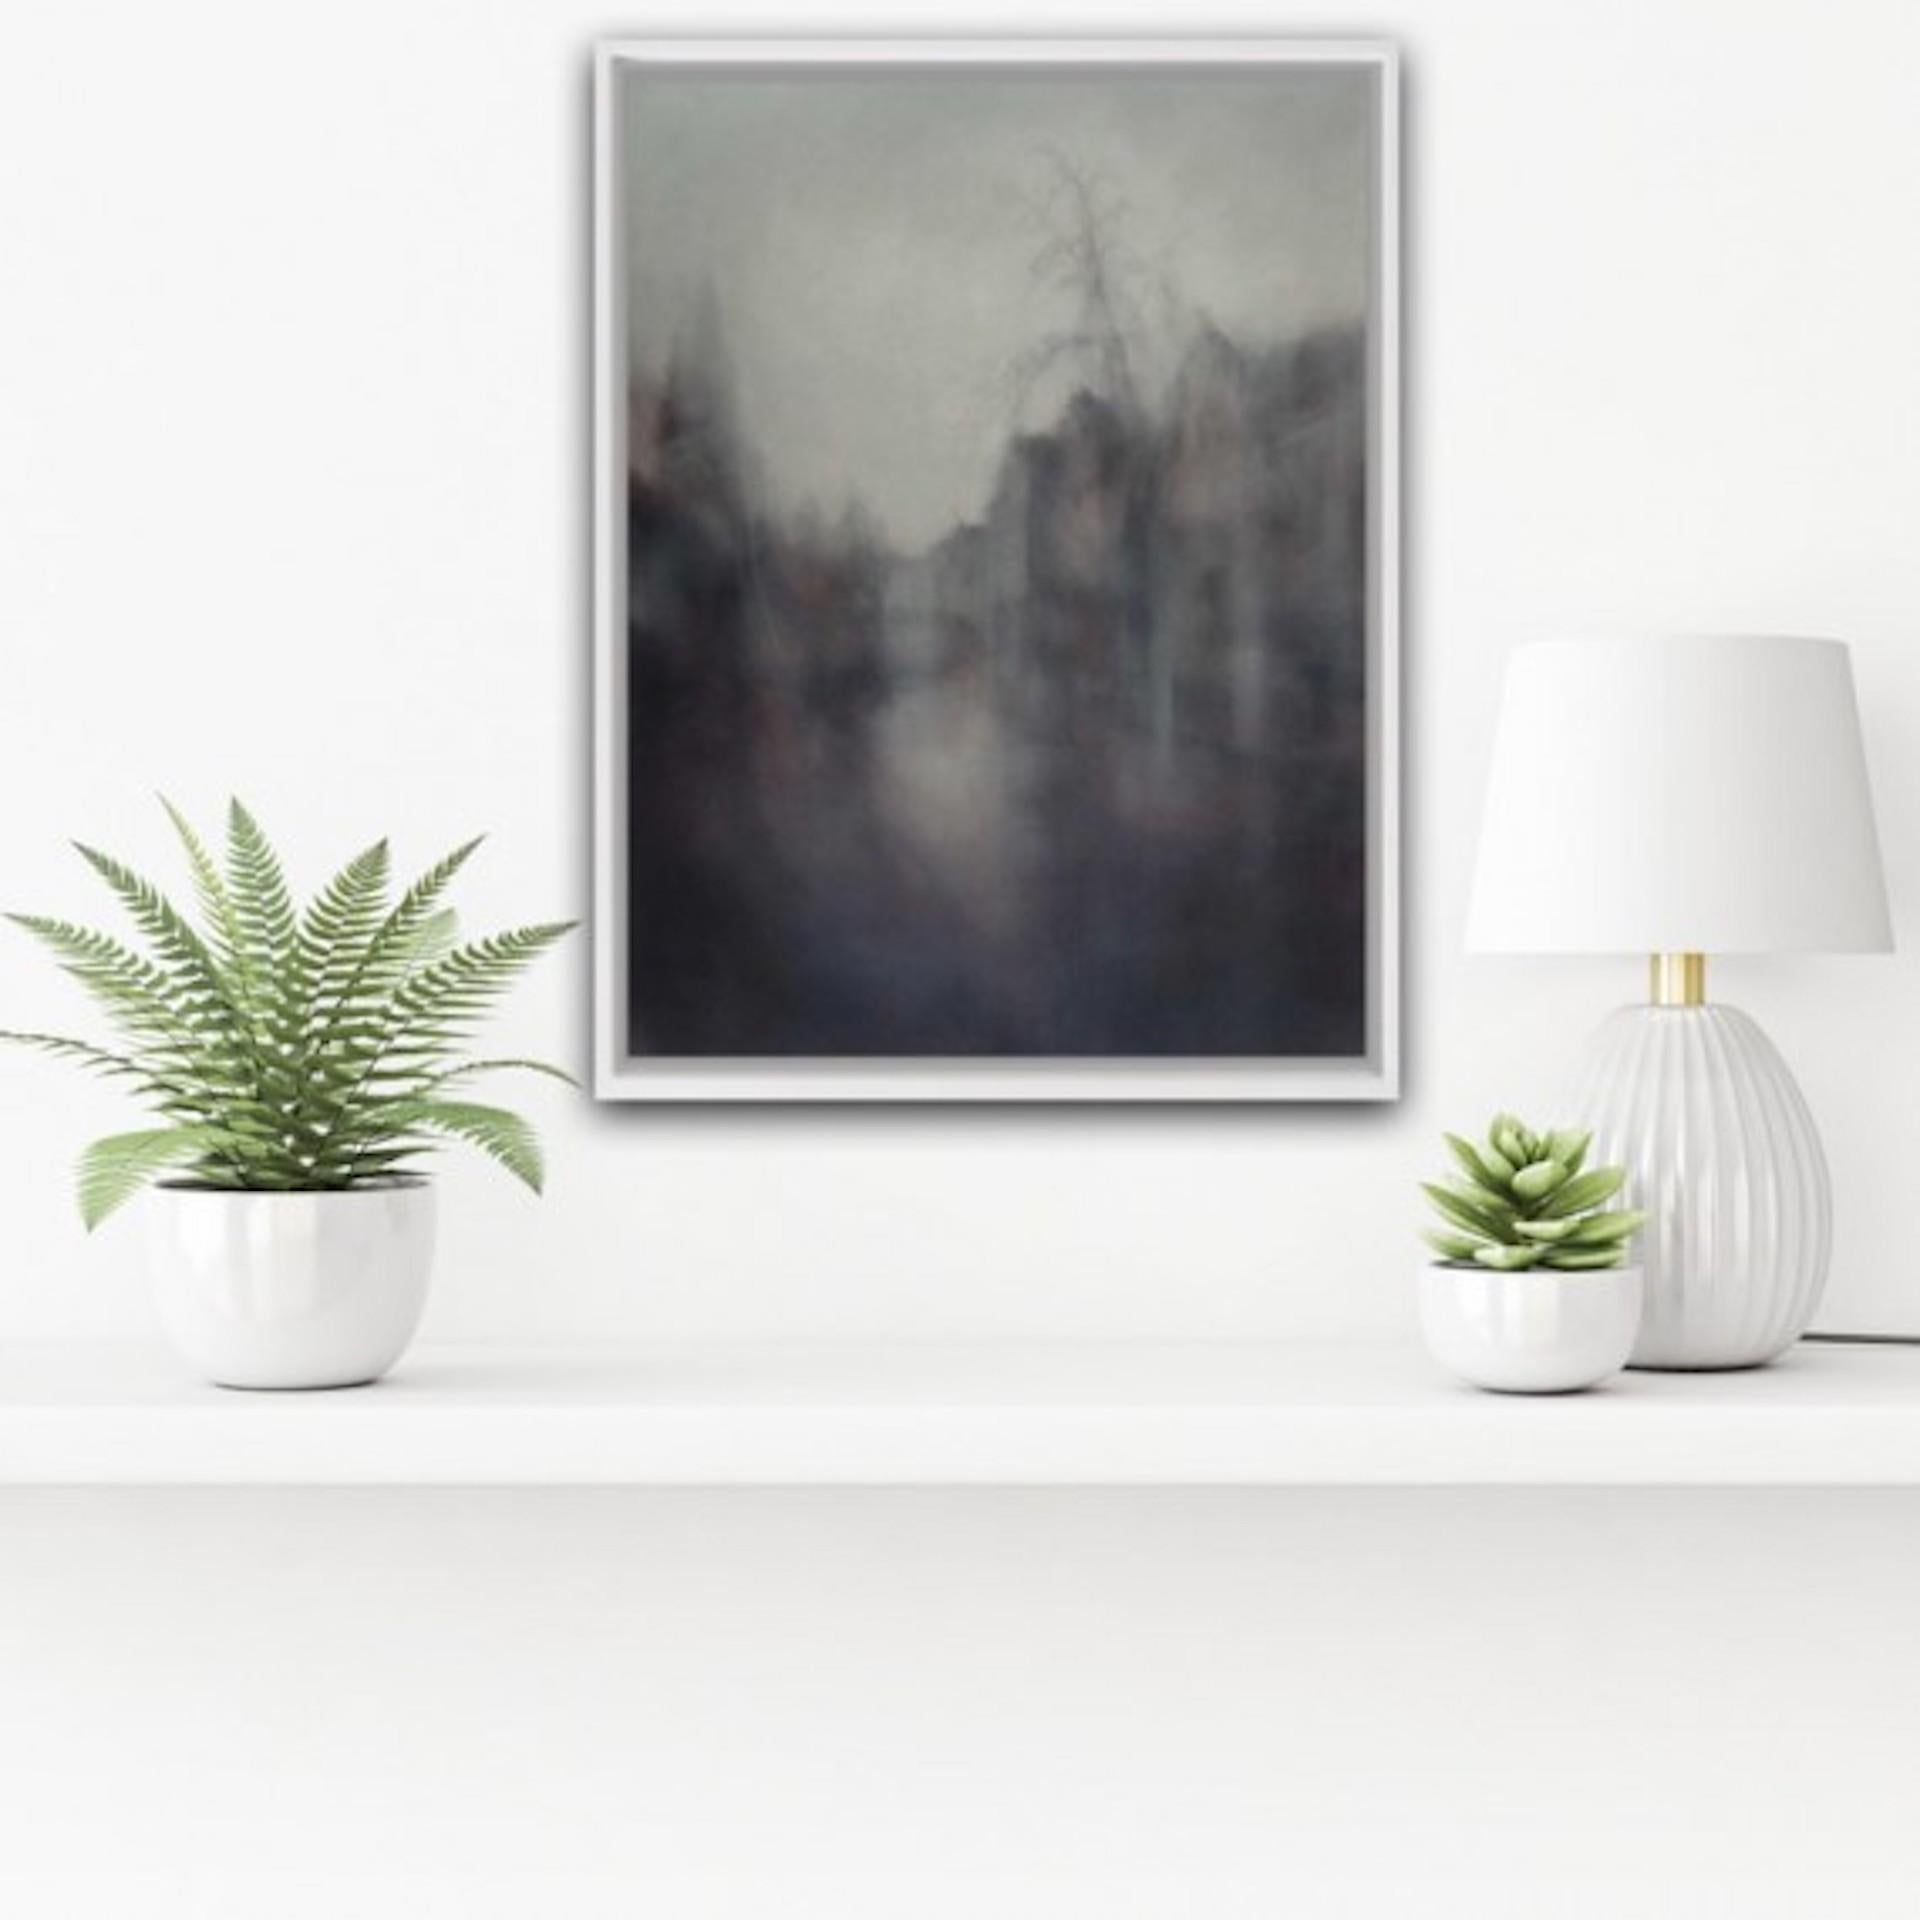 Twilight- Bruges VII [2017]
original

Oil on Linen

Image size: H:80 cm x W:60 cm

Complete Size of Unframed Work: H:80 cm x W:60 cm x D:3cm

Sold Unframed

Please note that insitu images are purely an indication of how a piece may look

This work